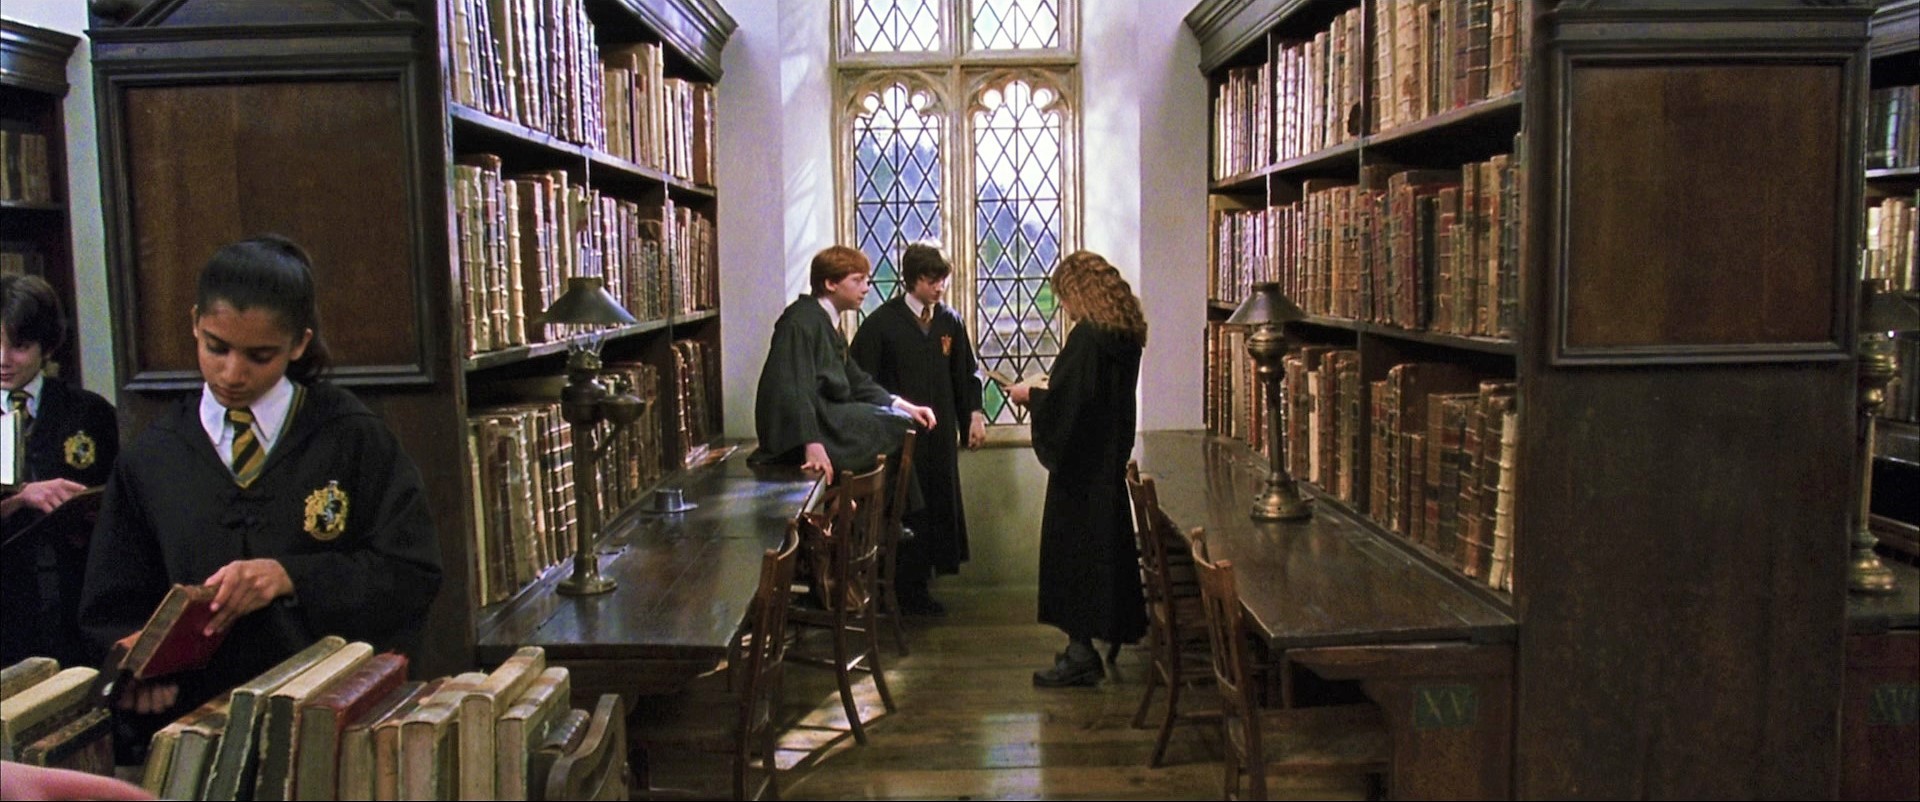 Harry-potter2-library